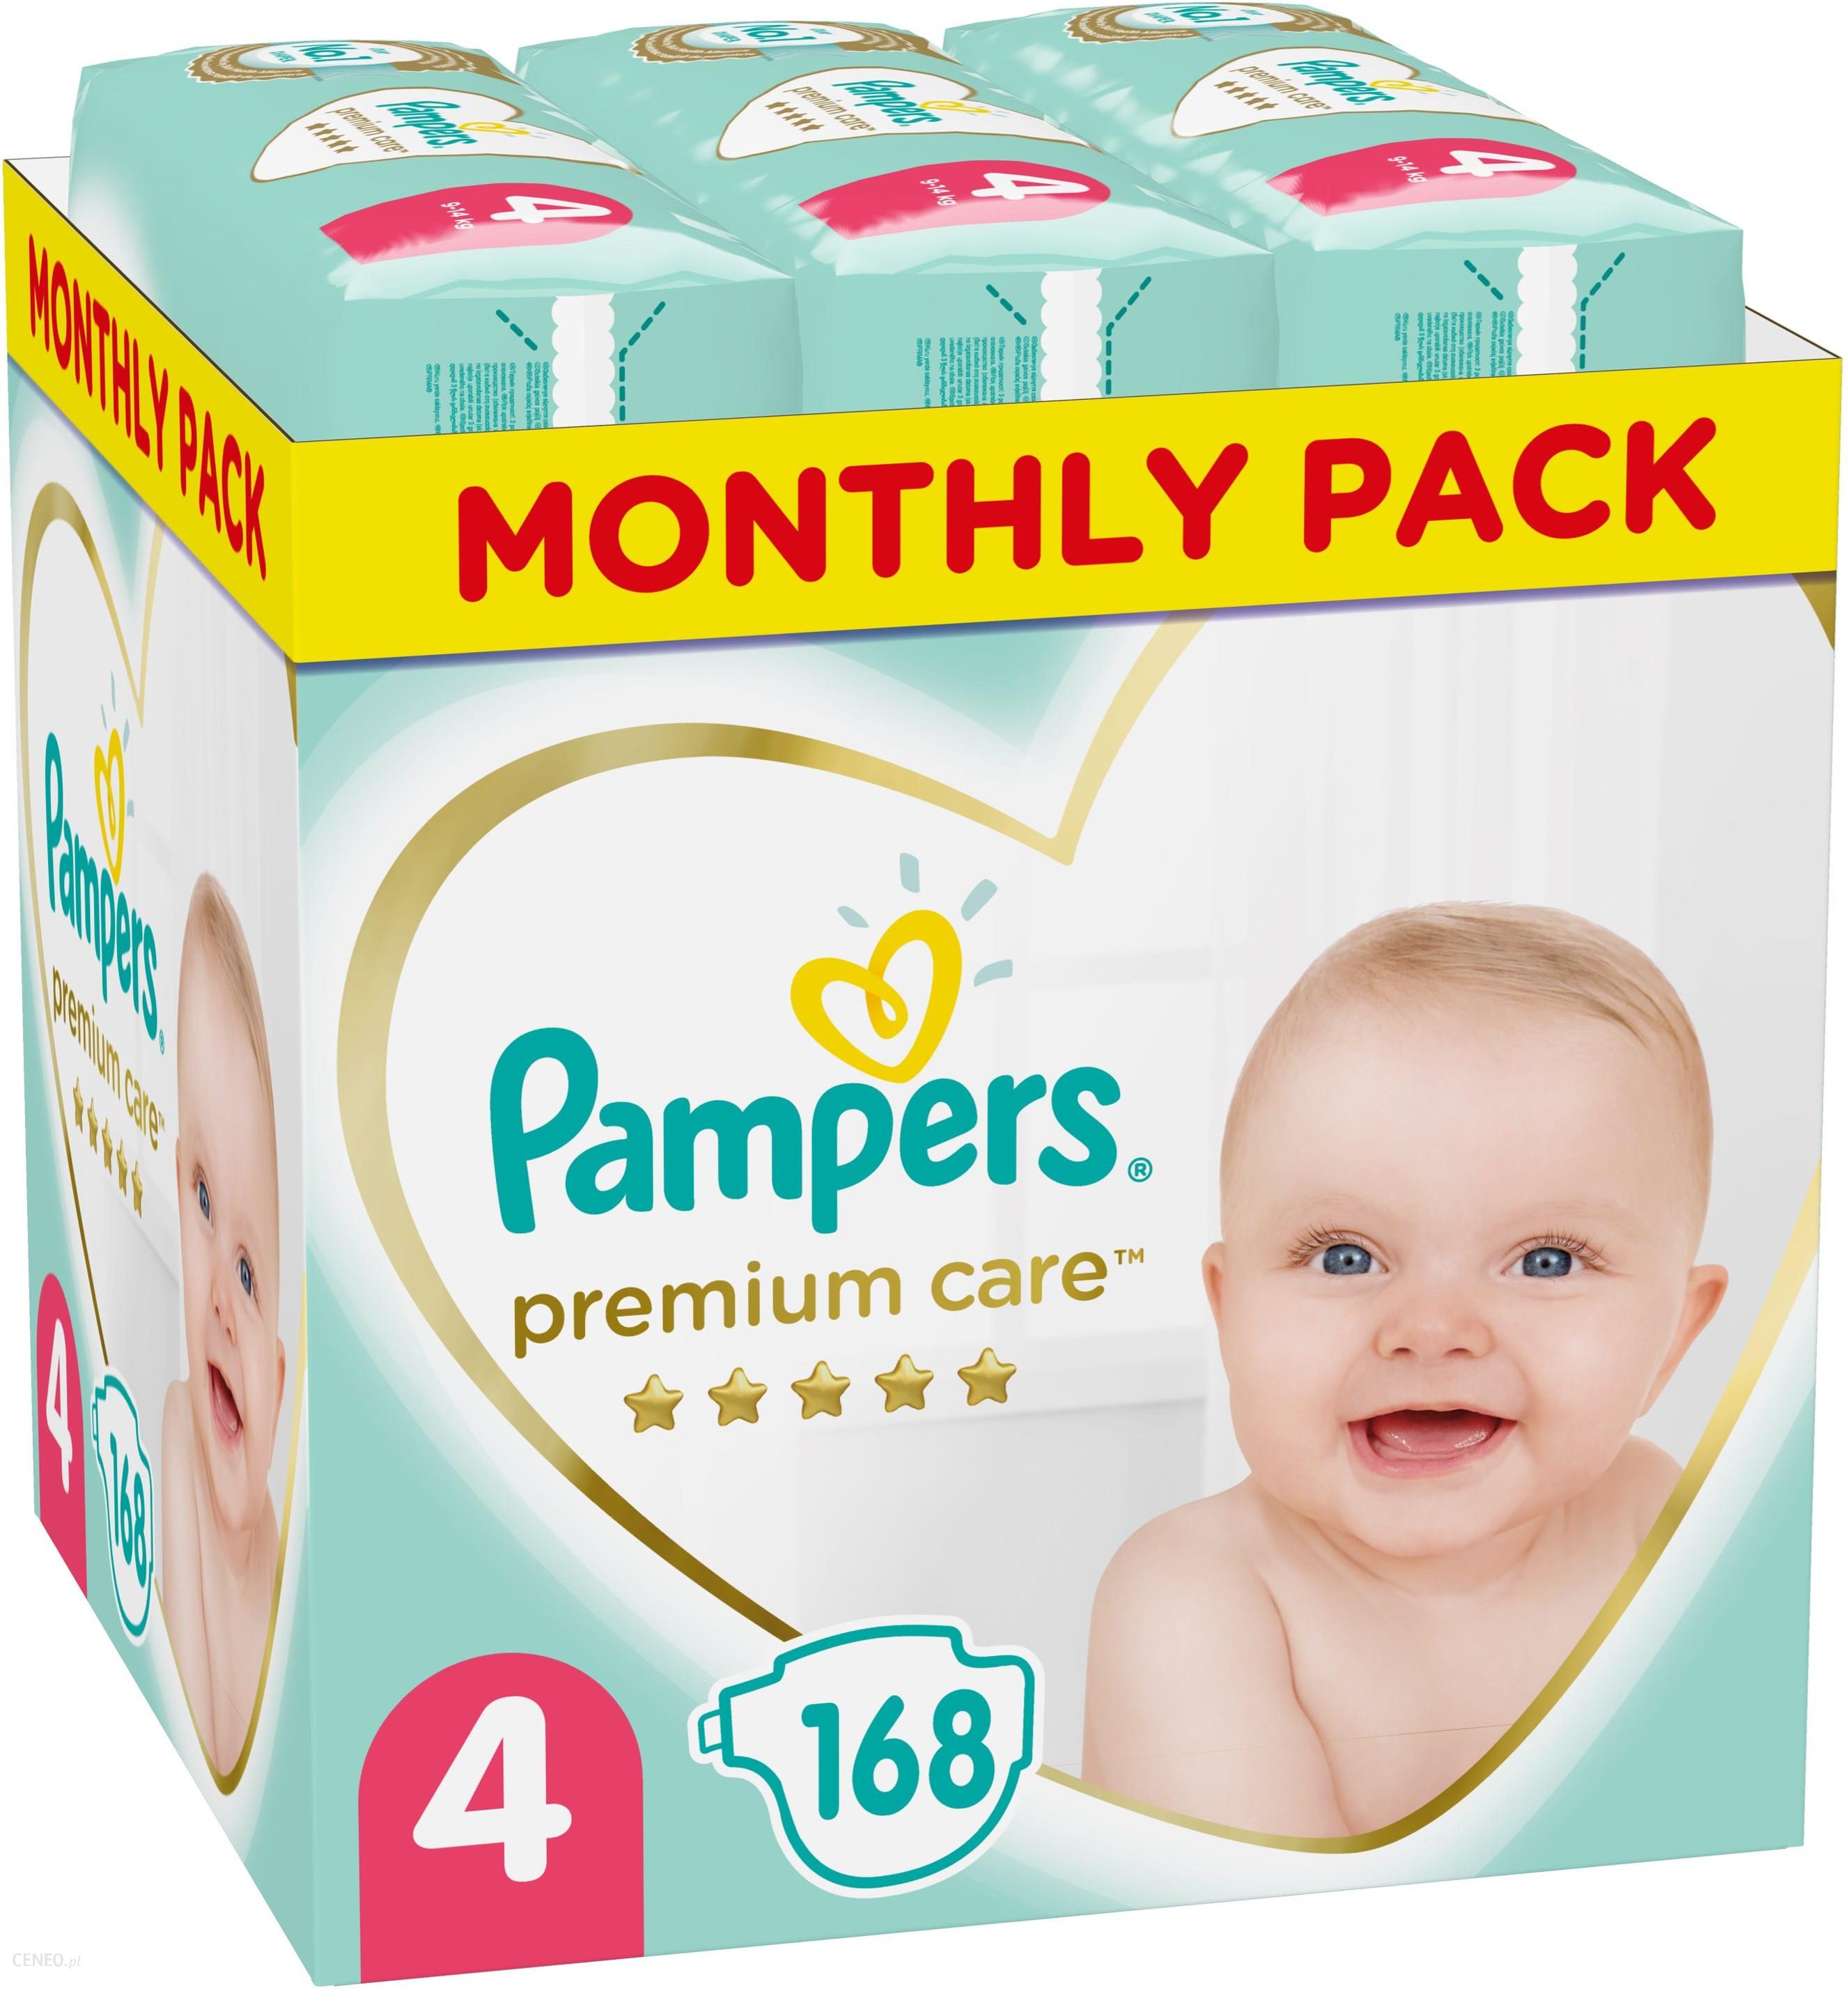 pampers sweety hello kitty